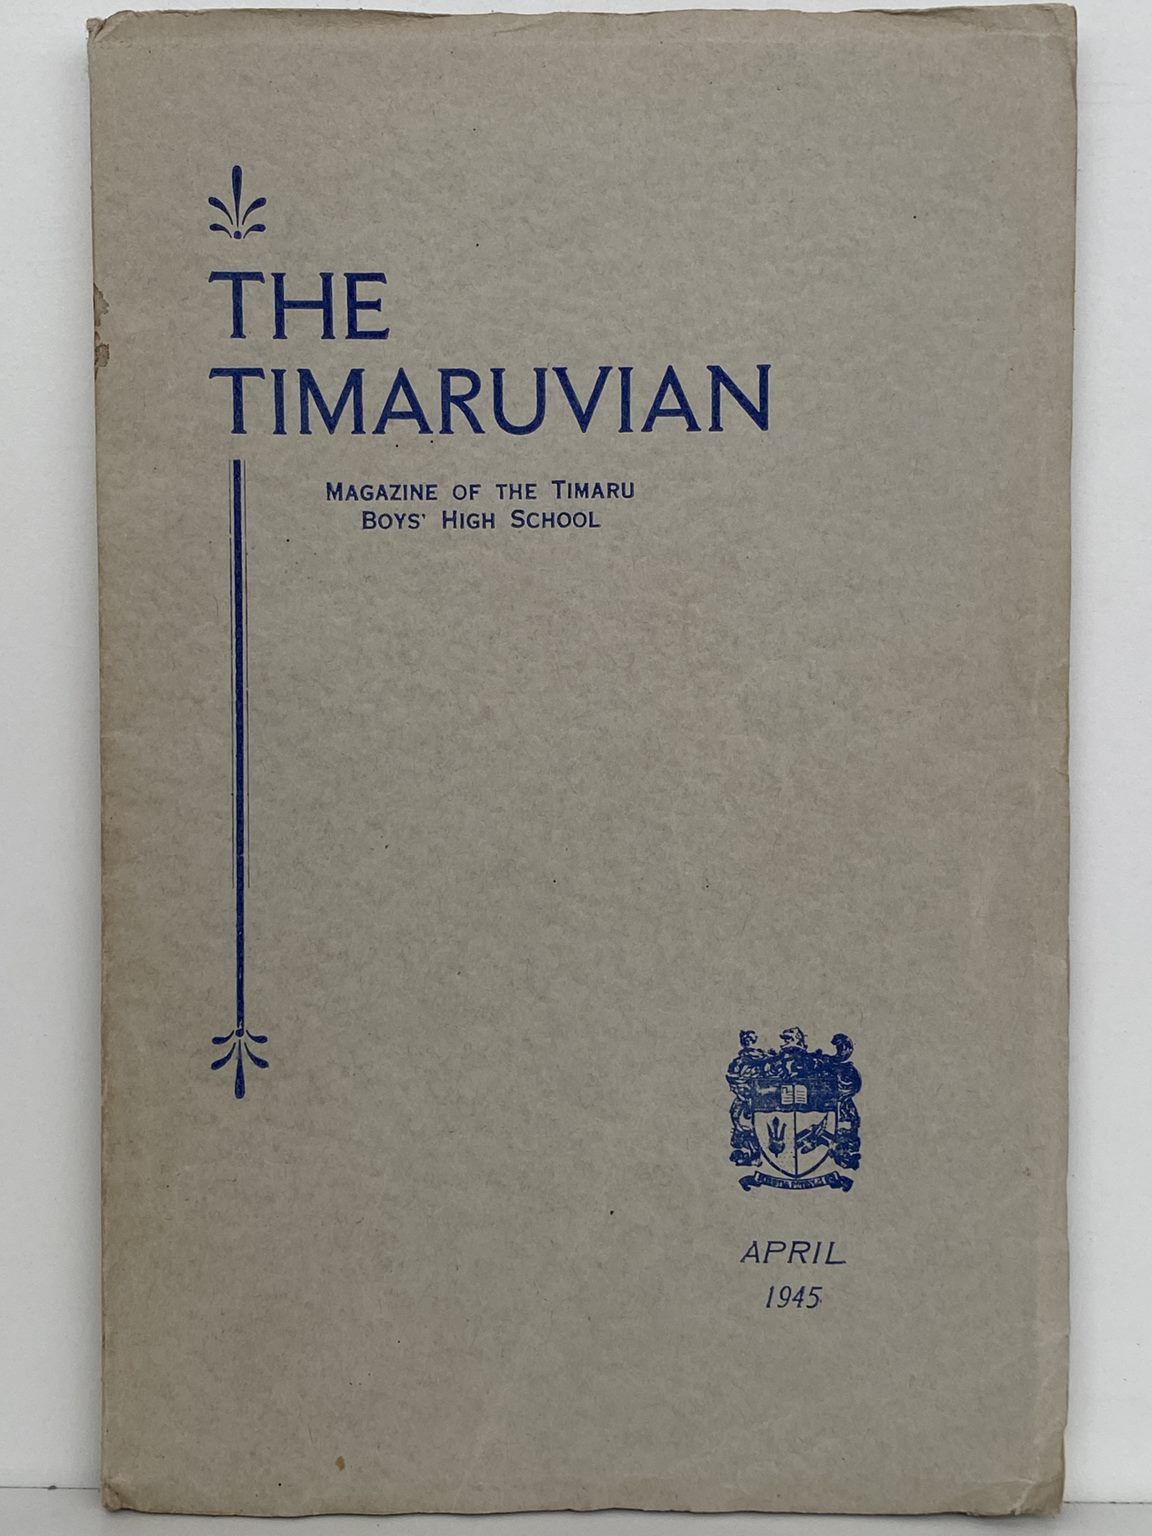 THE TIMARUVIAN: Magazine of the Timaru Boys' High School and its Old Boys' Association 1945